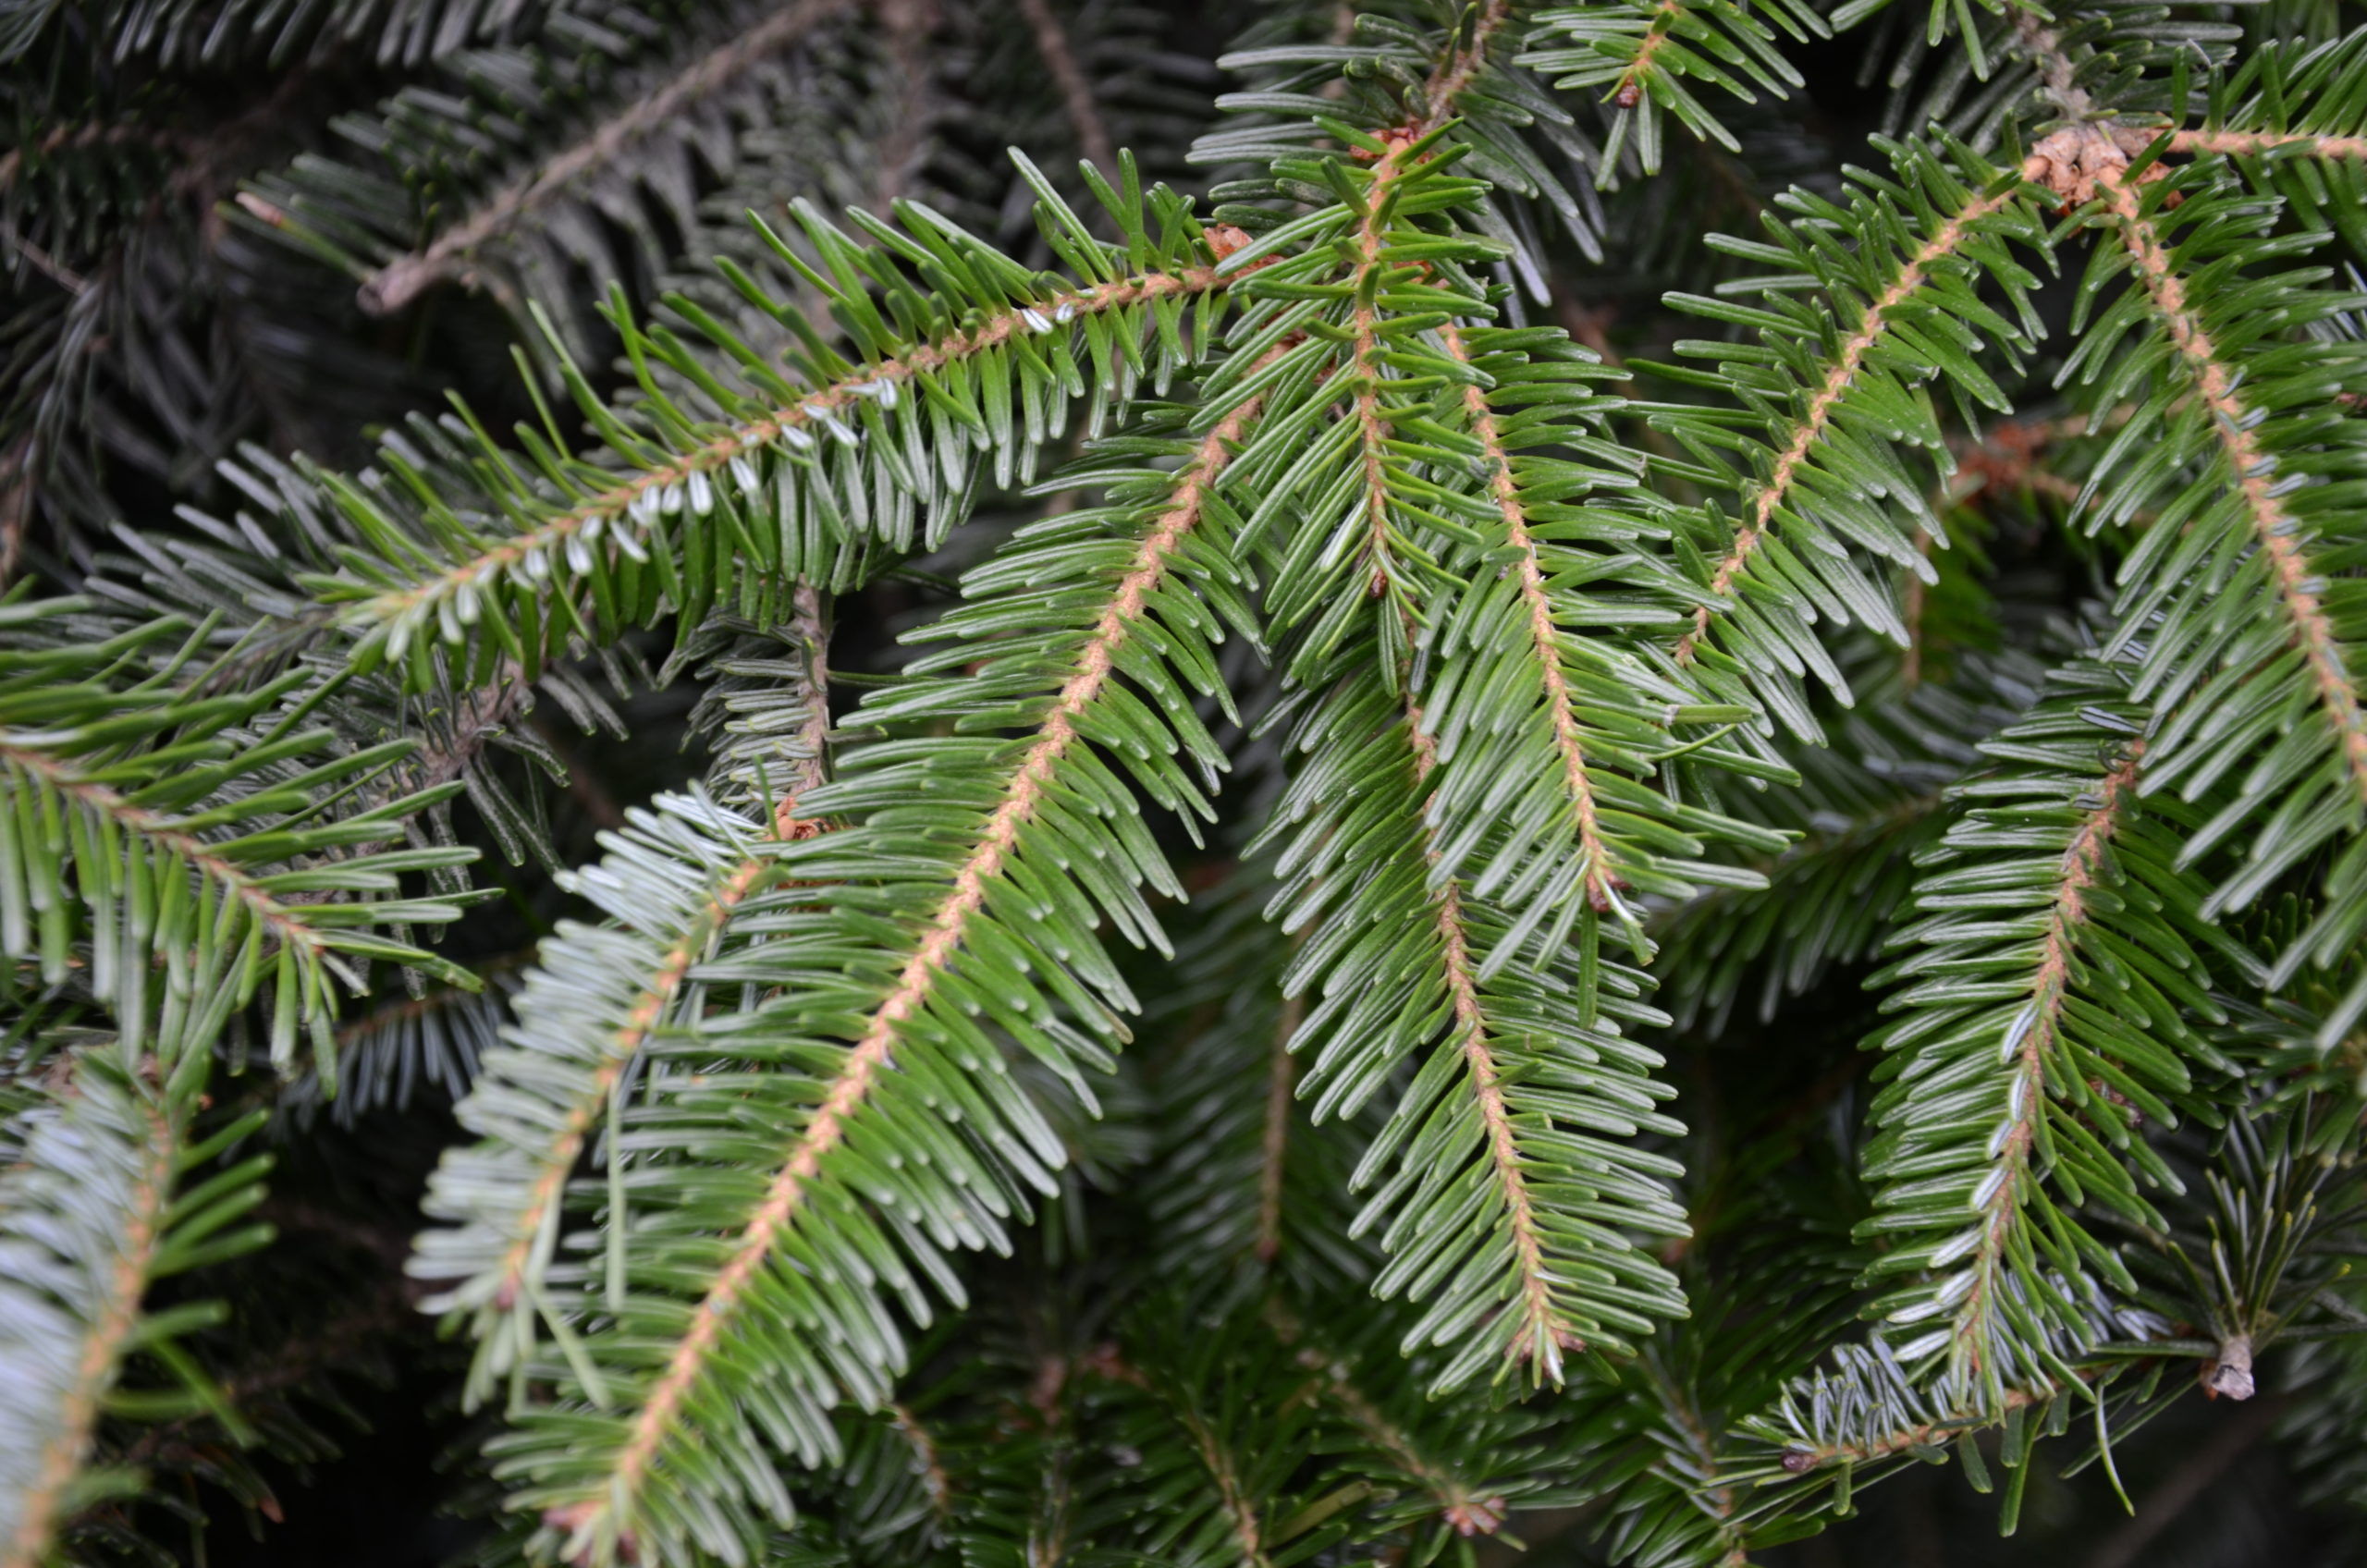 Fraser fir stem. The scent of this tree is mildly fragrant and this is the tree commonly used in the White House, but not always. It’s native to the Appalachian Mountains so adaptable to much of the East. 